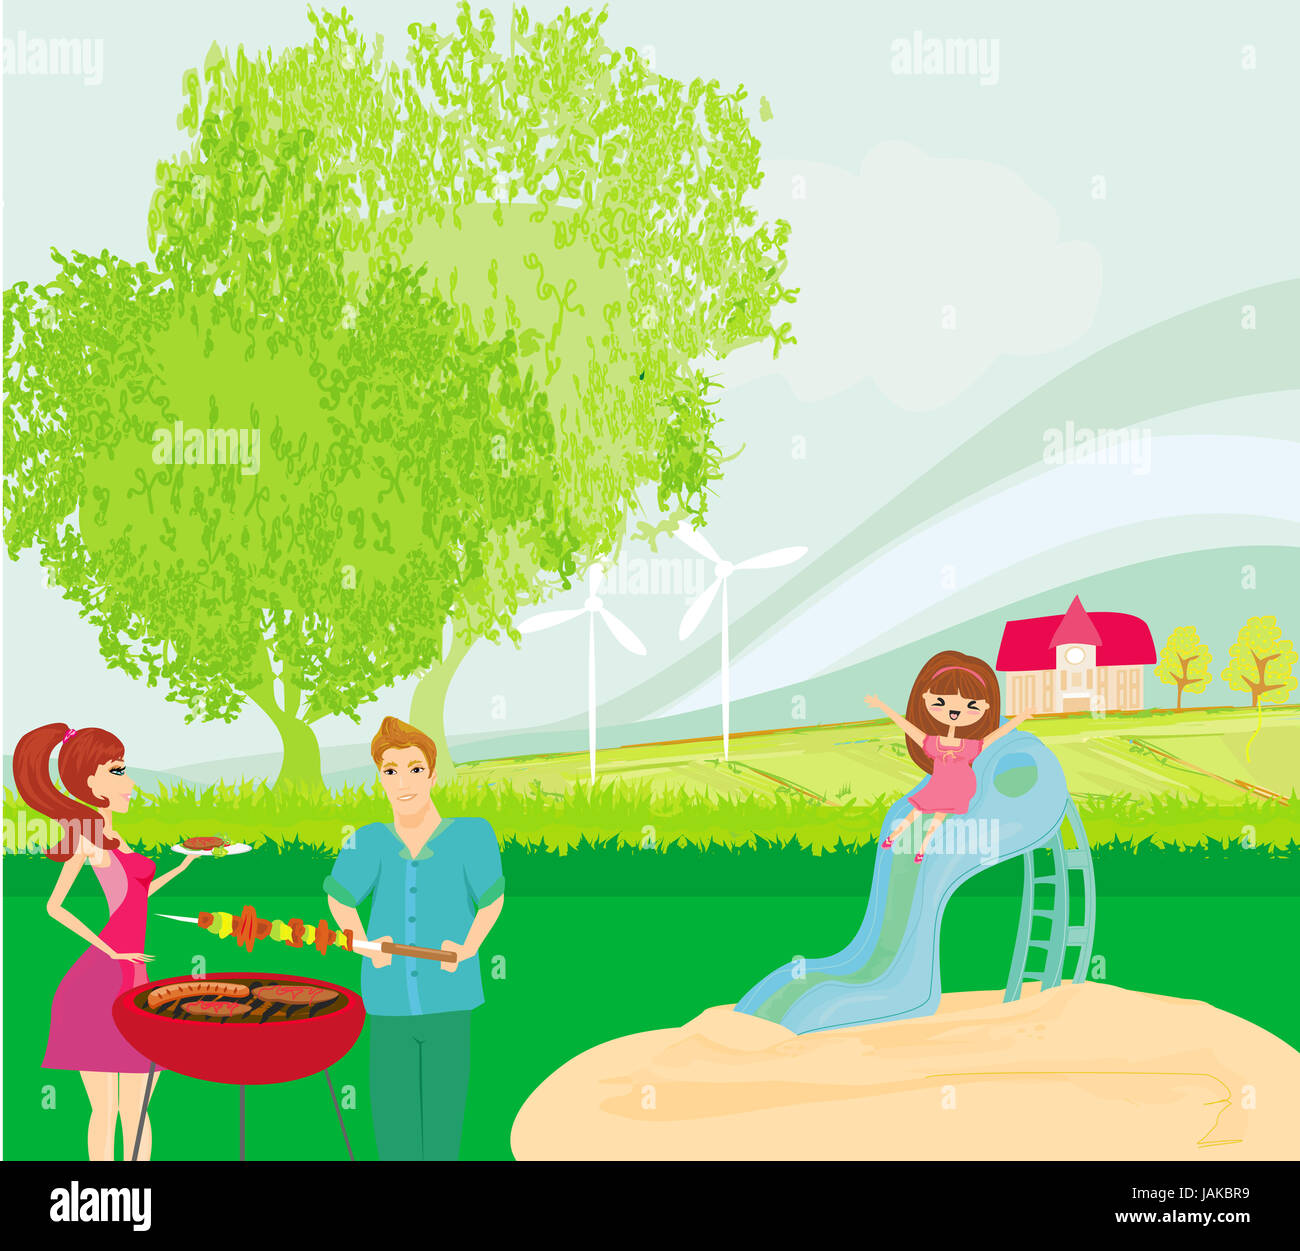 vector illustration of a family having a picnic Stock Photo